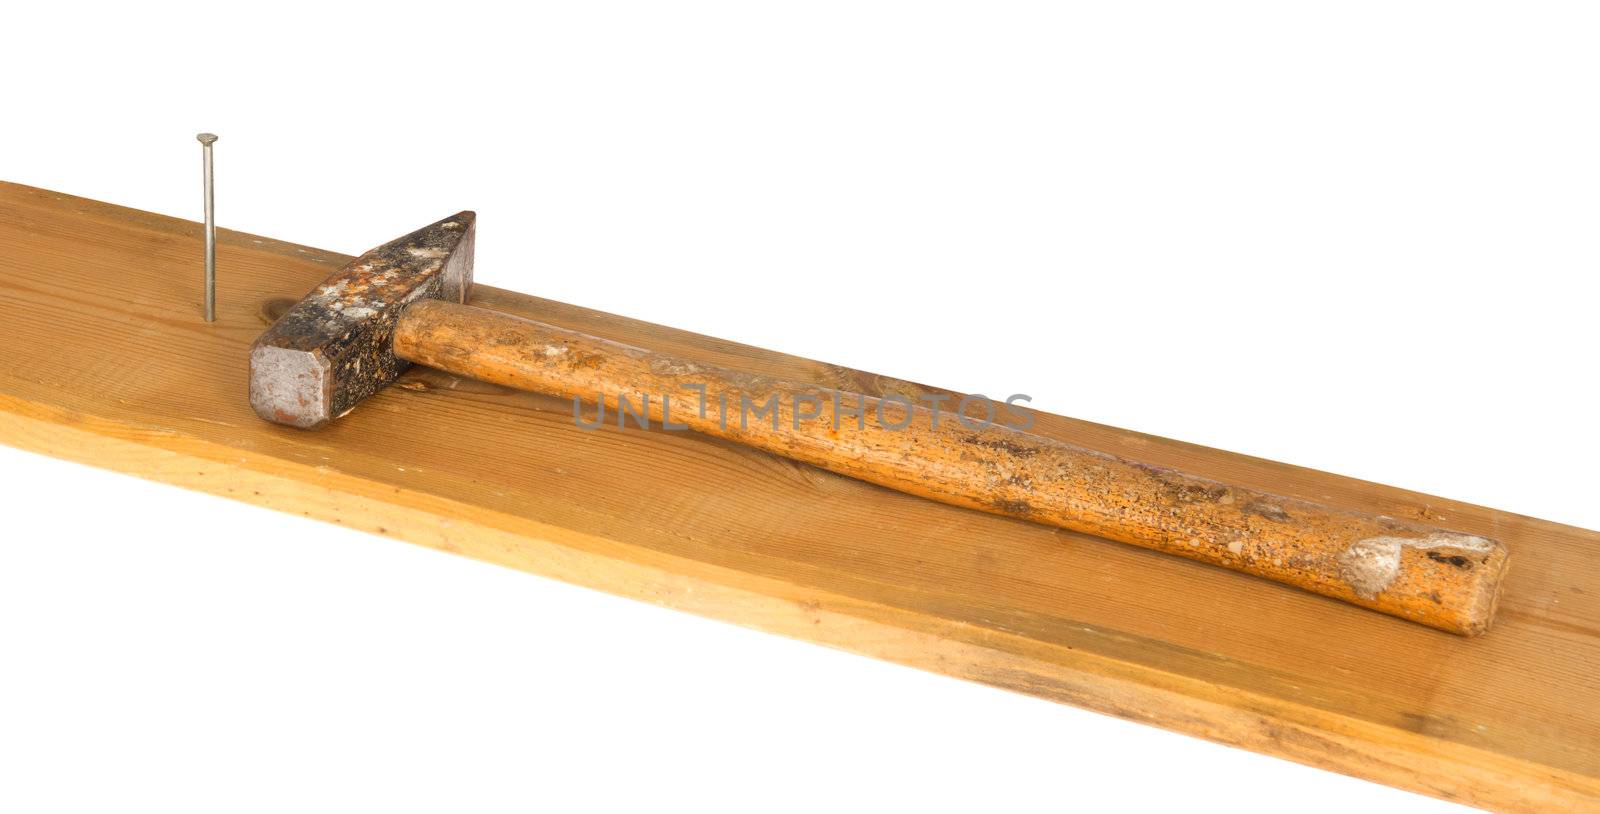 Hammer, nail and wooden board, isolated on background